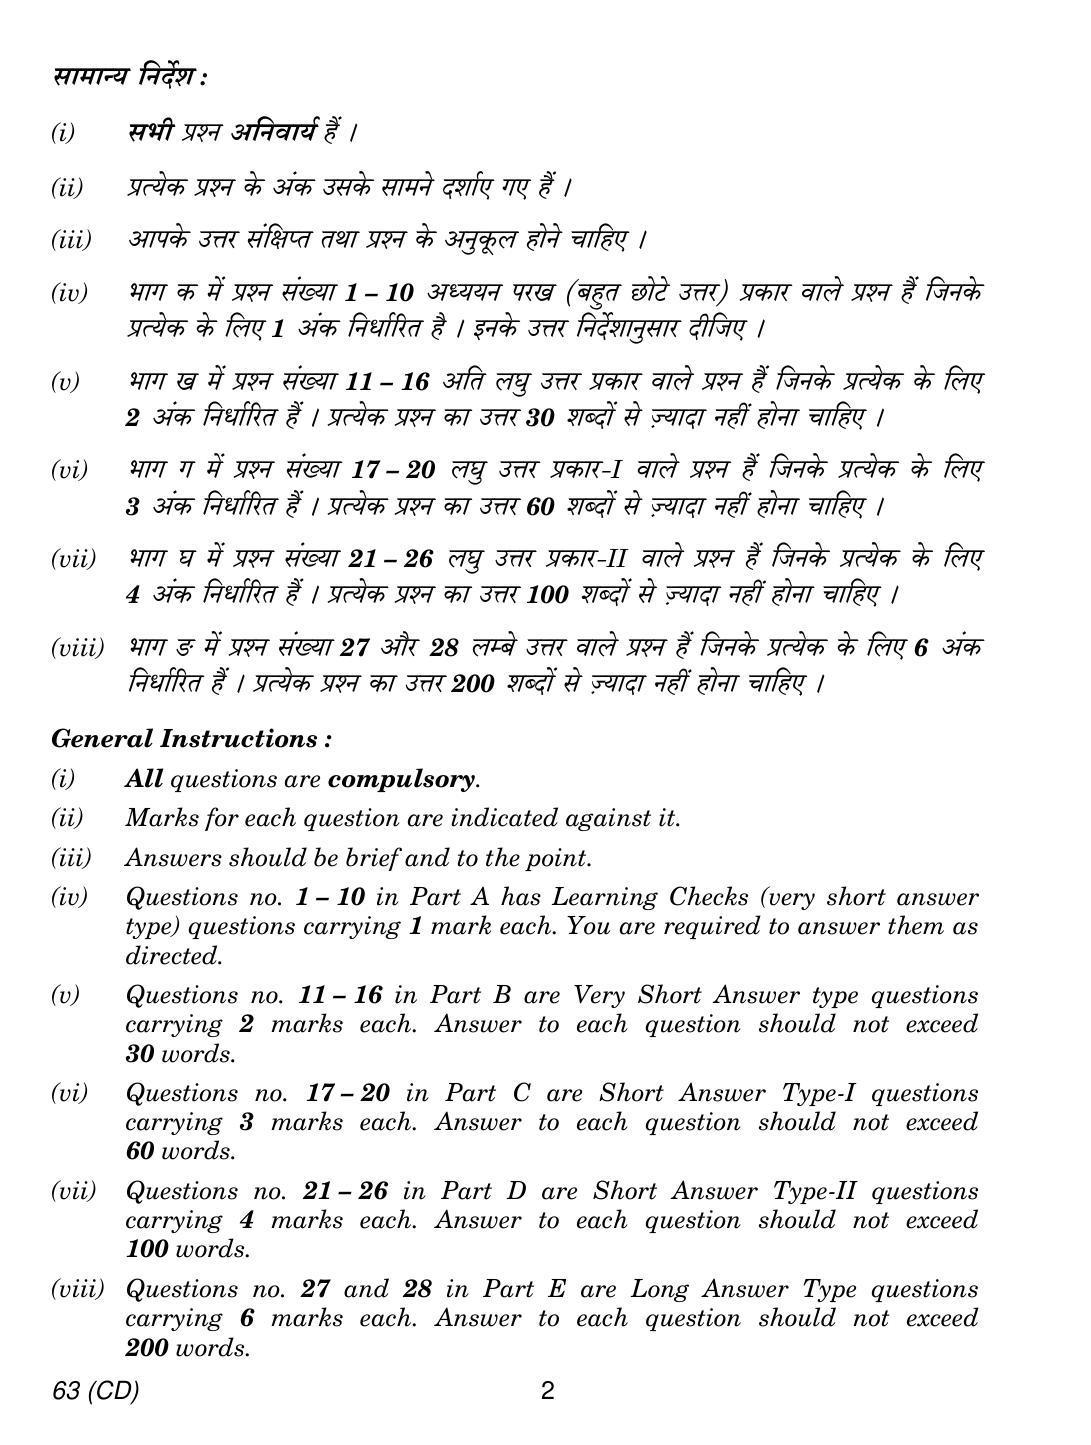 CBSE Class 12 63 PSYCHOLOGY CD 2018 Question Paper - Page 2